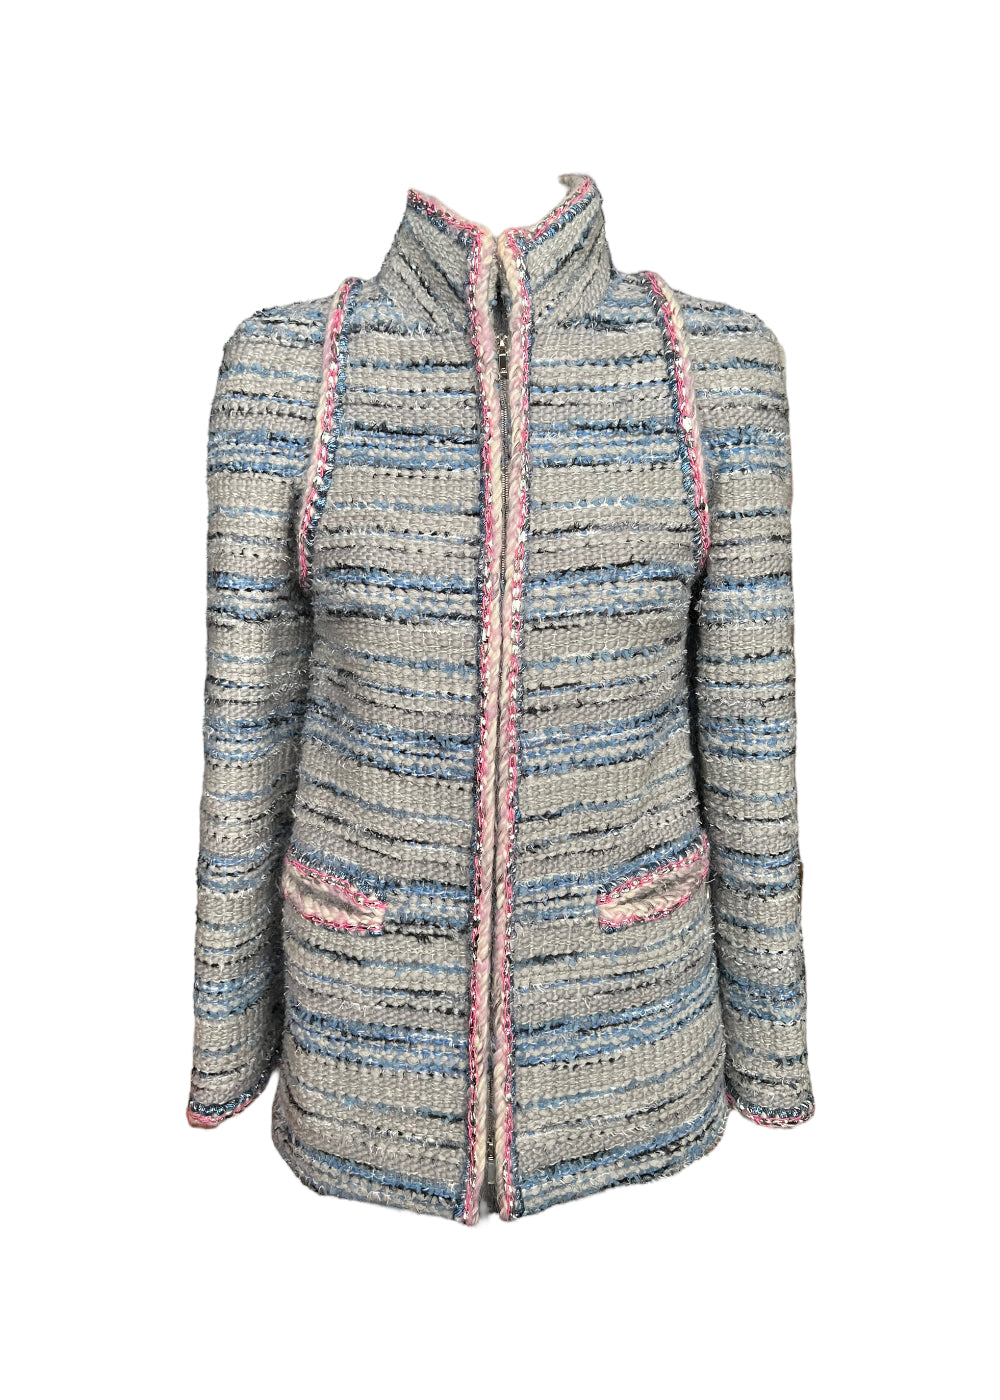 Chanel Jacket, FR36 - Huntessa Luxury Online Consignment Boutique